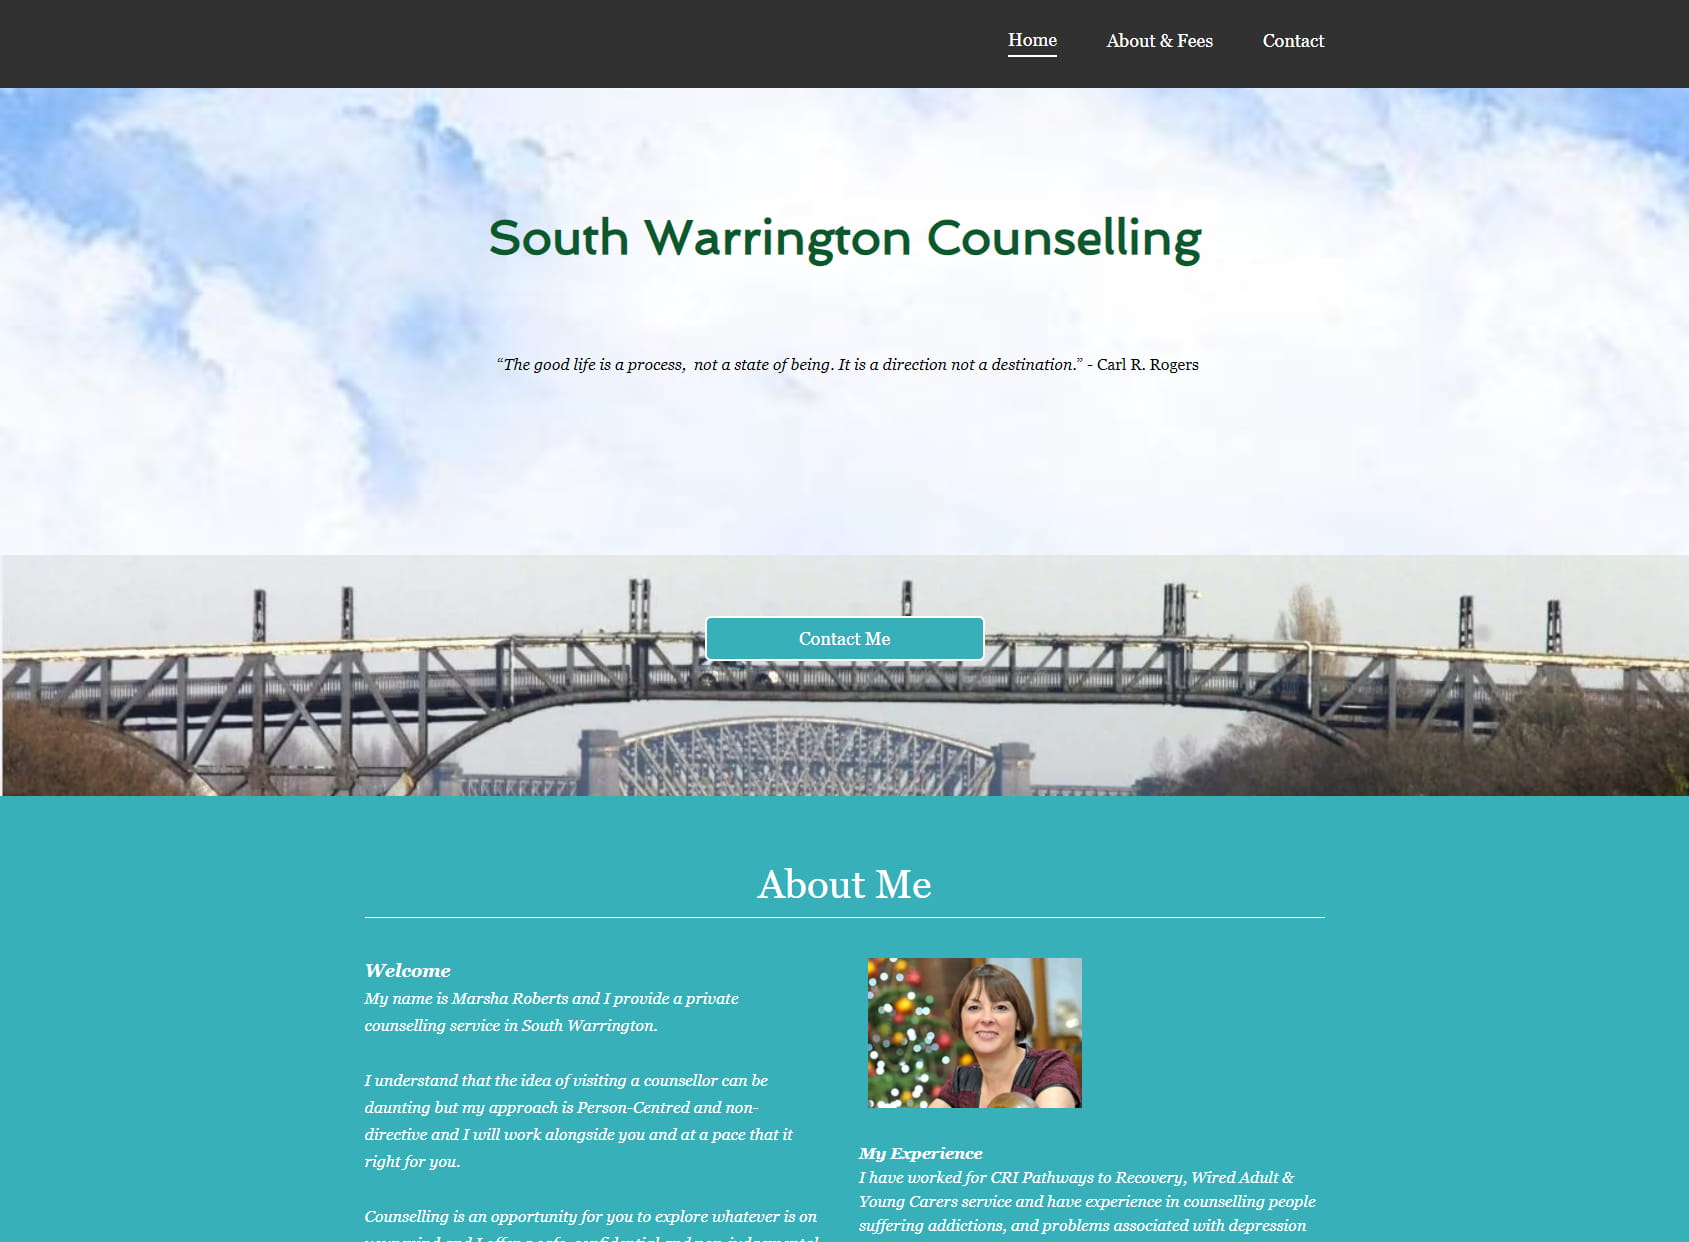 South Warrington Counselling